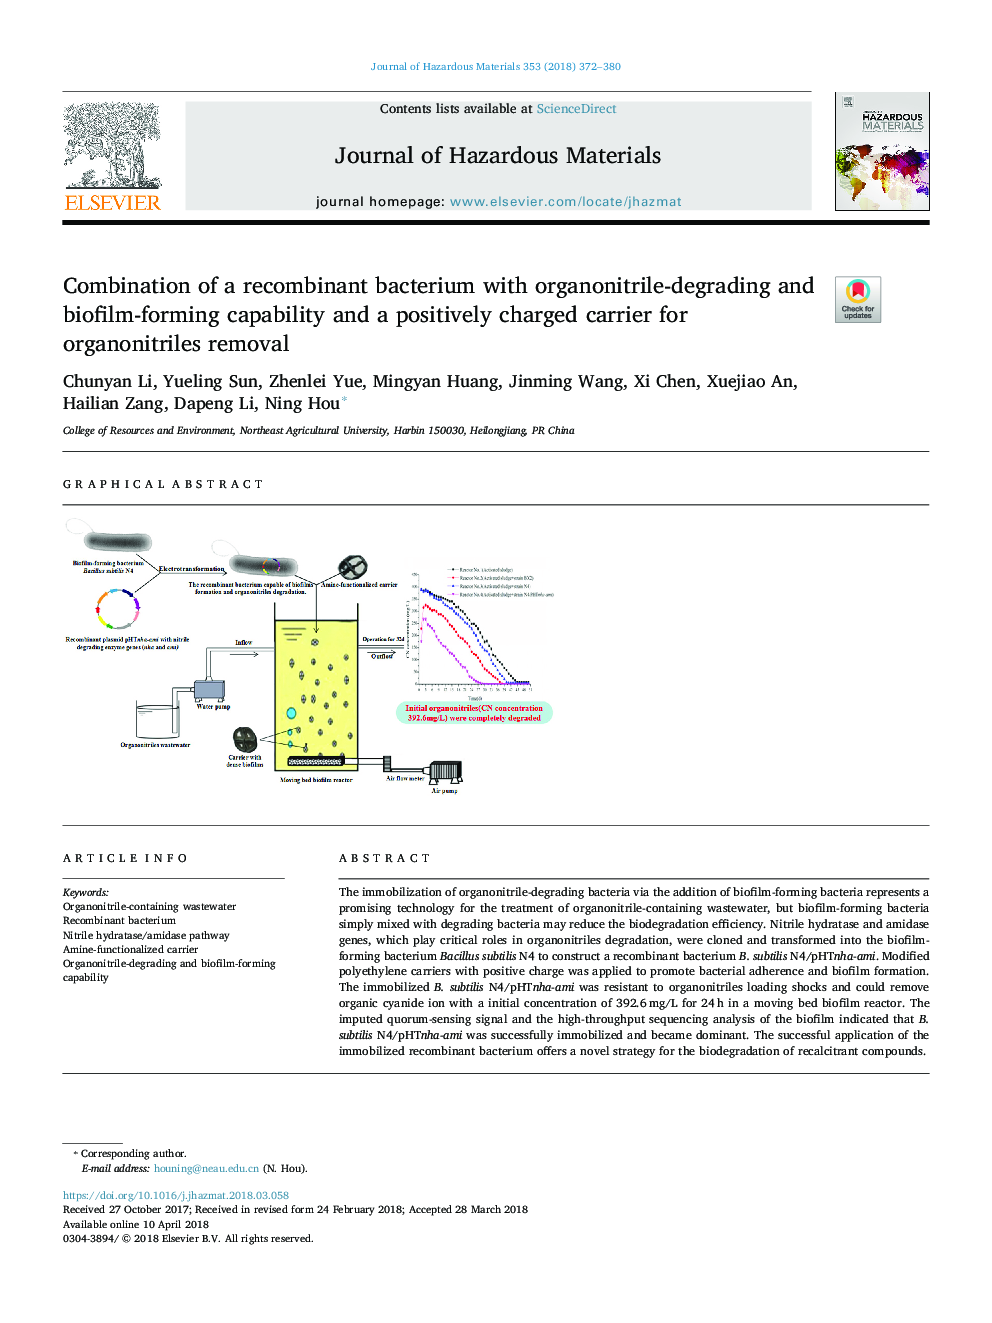 Combination of a recombinant bacterium with organonitrile-degrading and biofilm-forming capability and a positively charged carrier for organonitriles removal